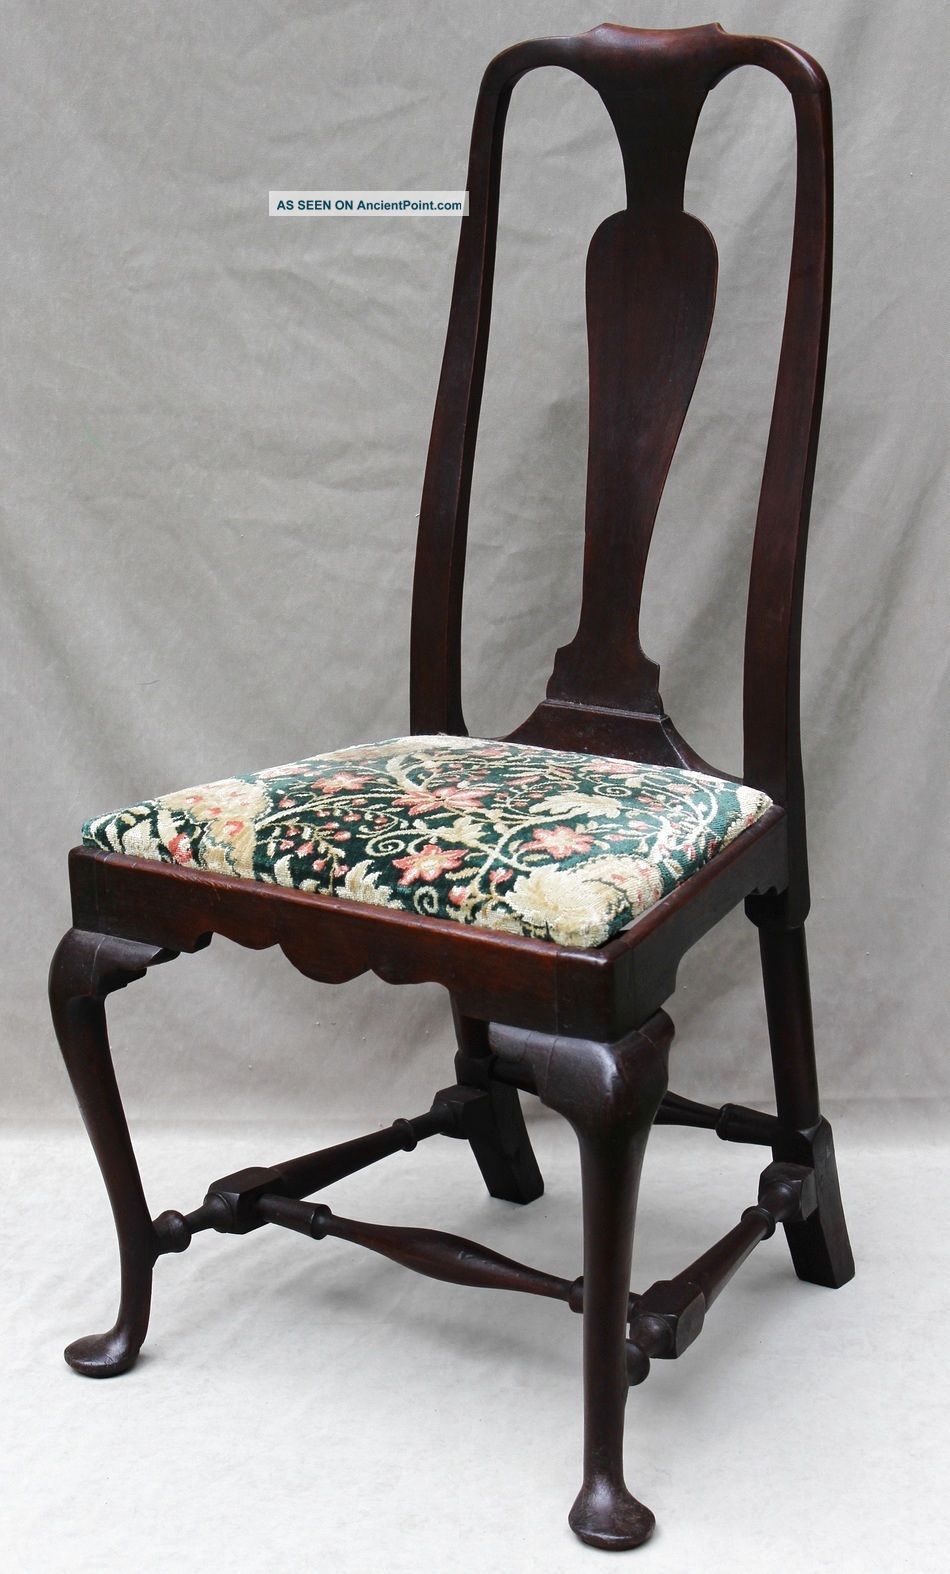 Authentic Antique 18thc American Boston Queen Anne Pad Foot Walnut Side Chair Pre-1800 photo